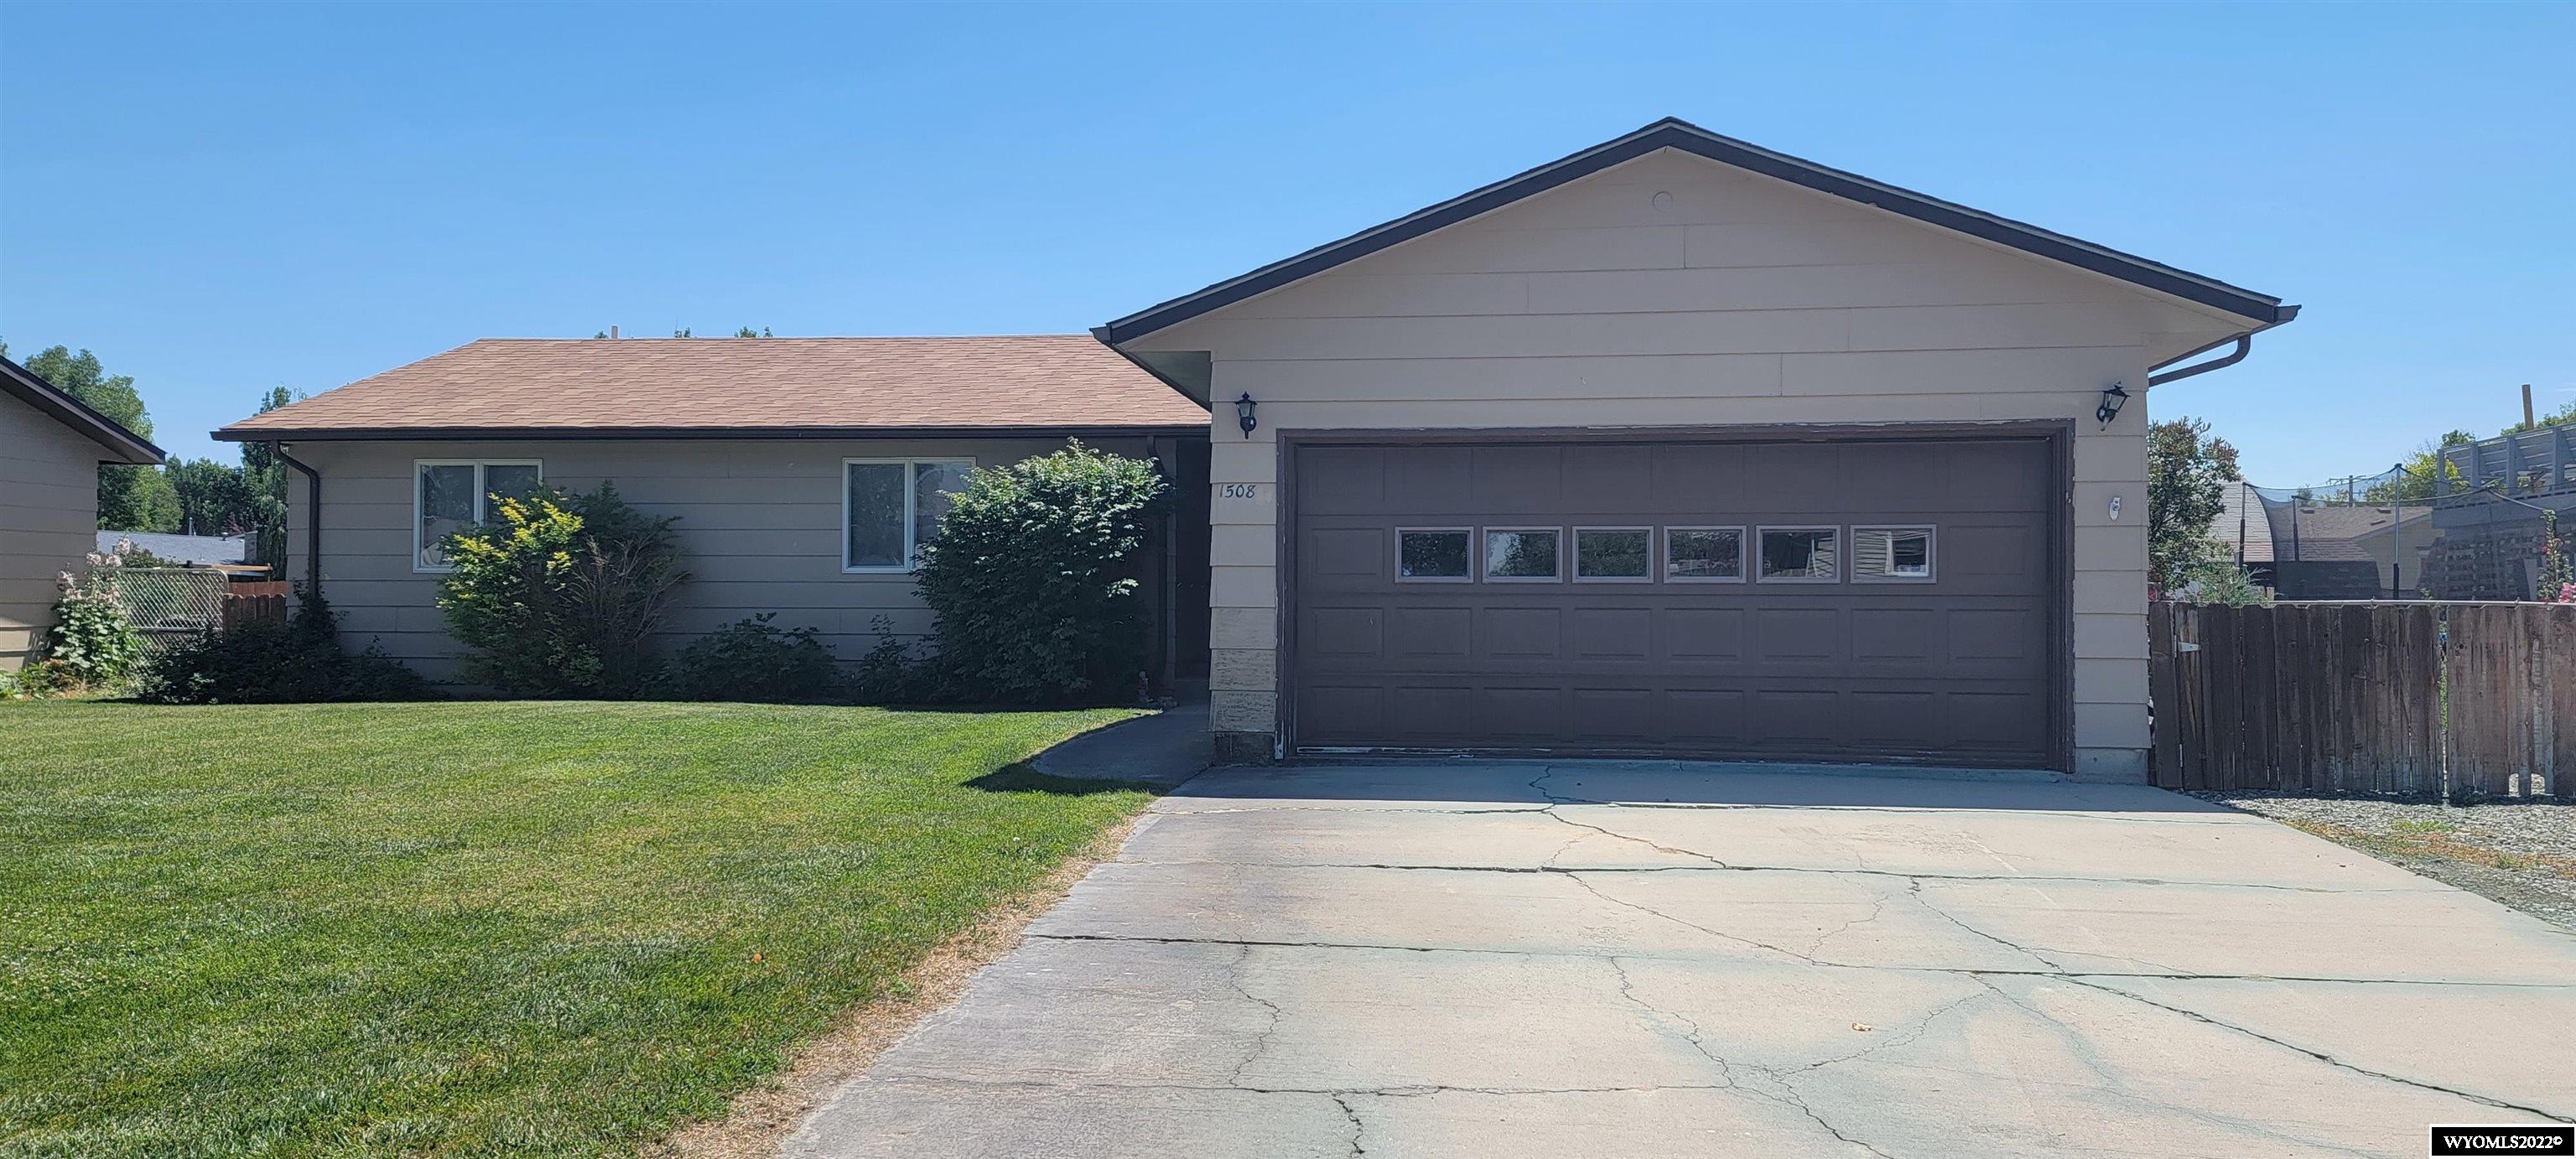 Ranch style home, 1 level, 3 bedrooms, 2 baths, master bath, walk-in closet, nice pantry, covered patio, fenced yard., well/pump with sprinkler system.  House will have a new roof in the next week or so.  House is sold as is, seller will not do any repairs